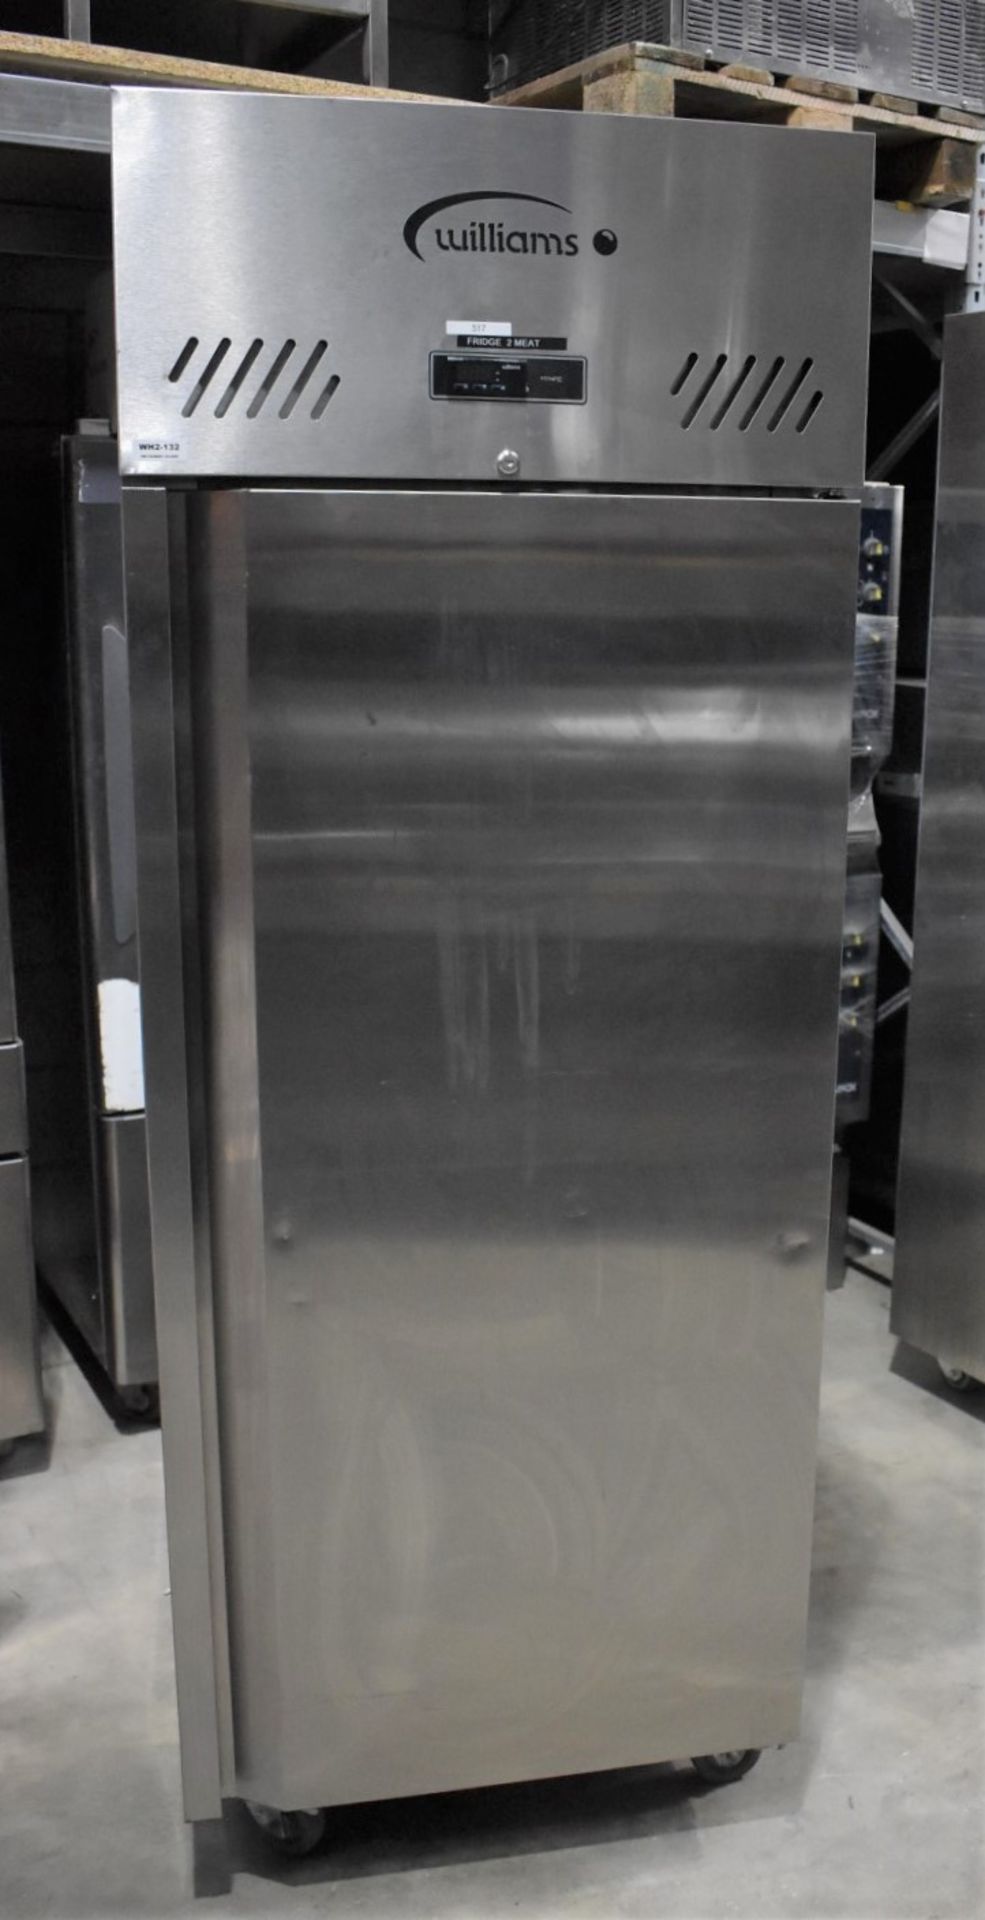 1 x Williams Upright Single Door Refrigerator With Stainless Steel Exterior - Model HS1SA - Recently